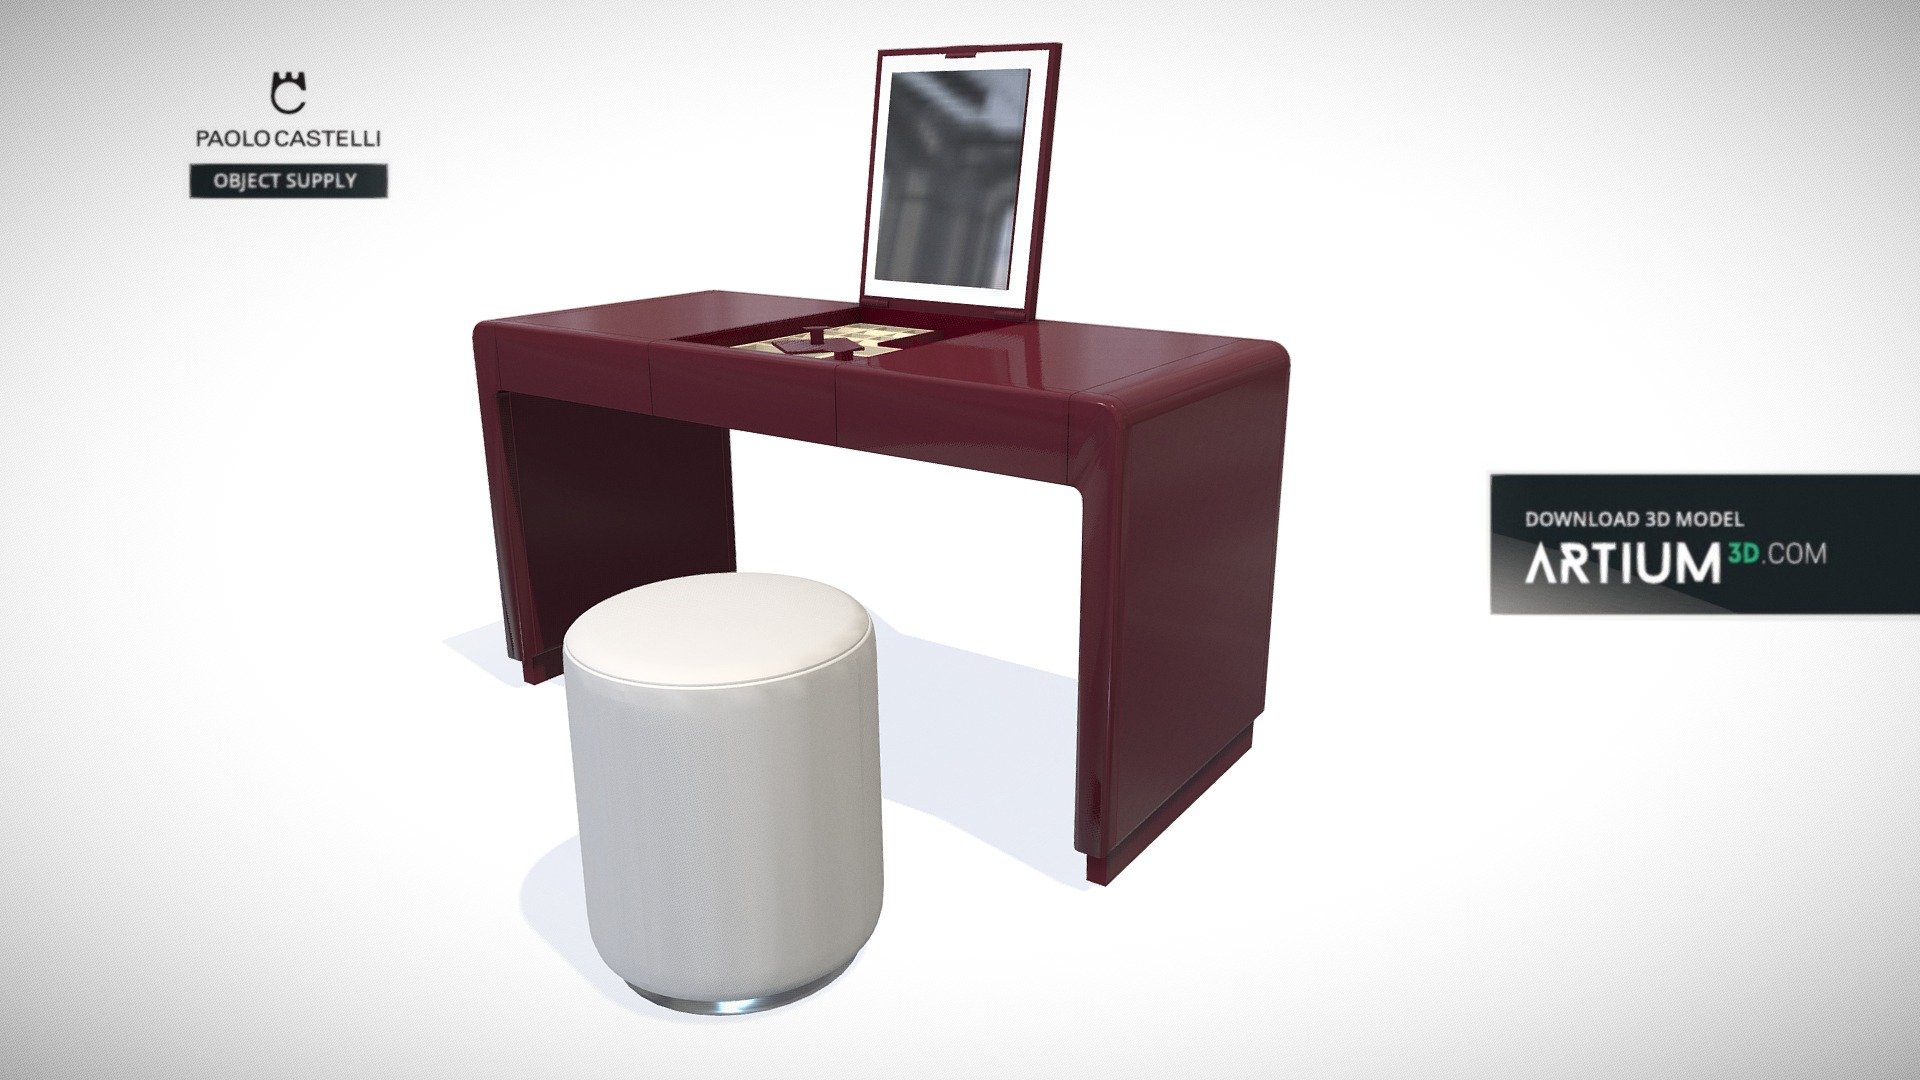 Makeup desk My Beauty from Paolo Castelli - Design by Paolo Castelli
mdf lacquered, leather, mirror

size:  h-72/121 x w-135 x d-60 cm

code: SK-060 - Makeup desk My Beauty from Paolo Castelli - Buy Royalty Free 3D model by ARTIUM3D 3d model